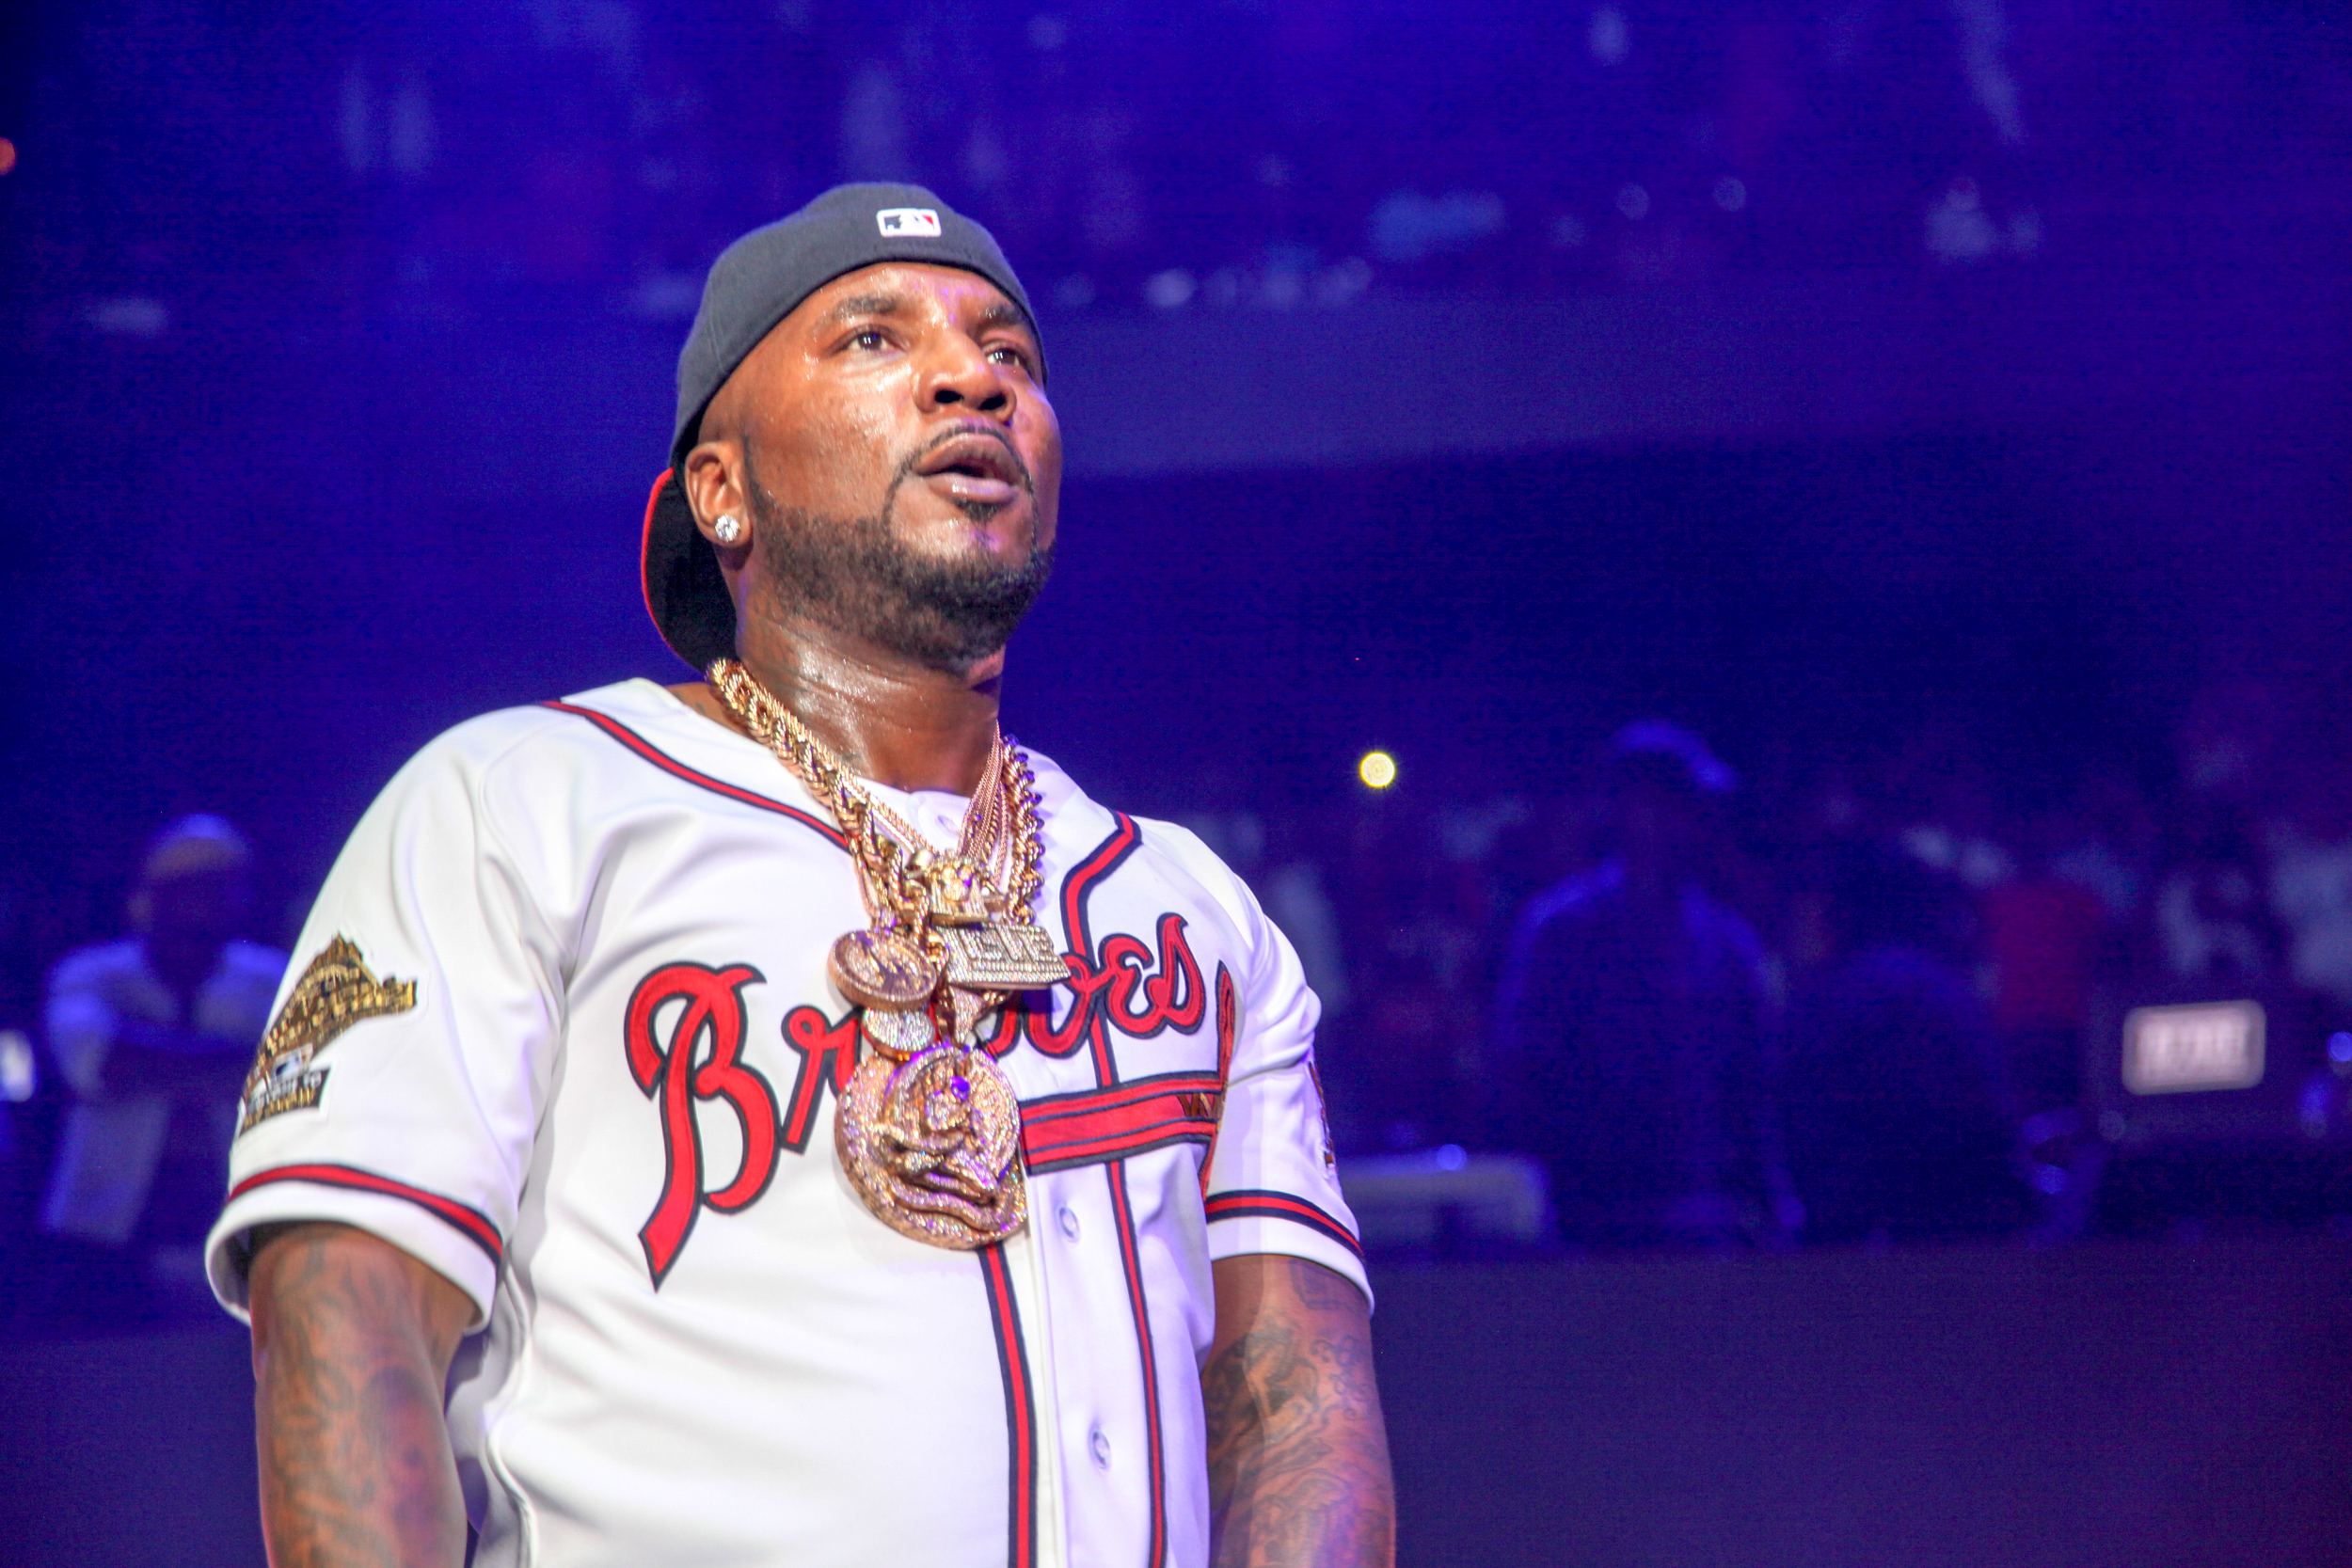 Jeezy And His Wife Jeannie Mai Welcome Their New Baby In To The World!